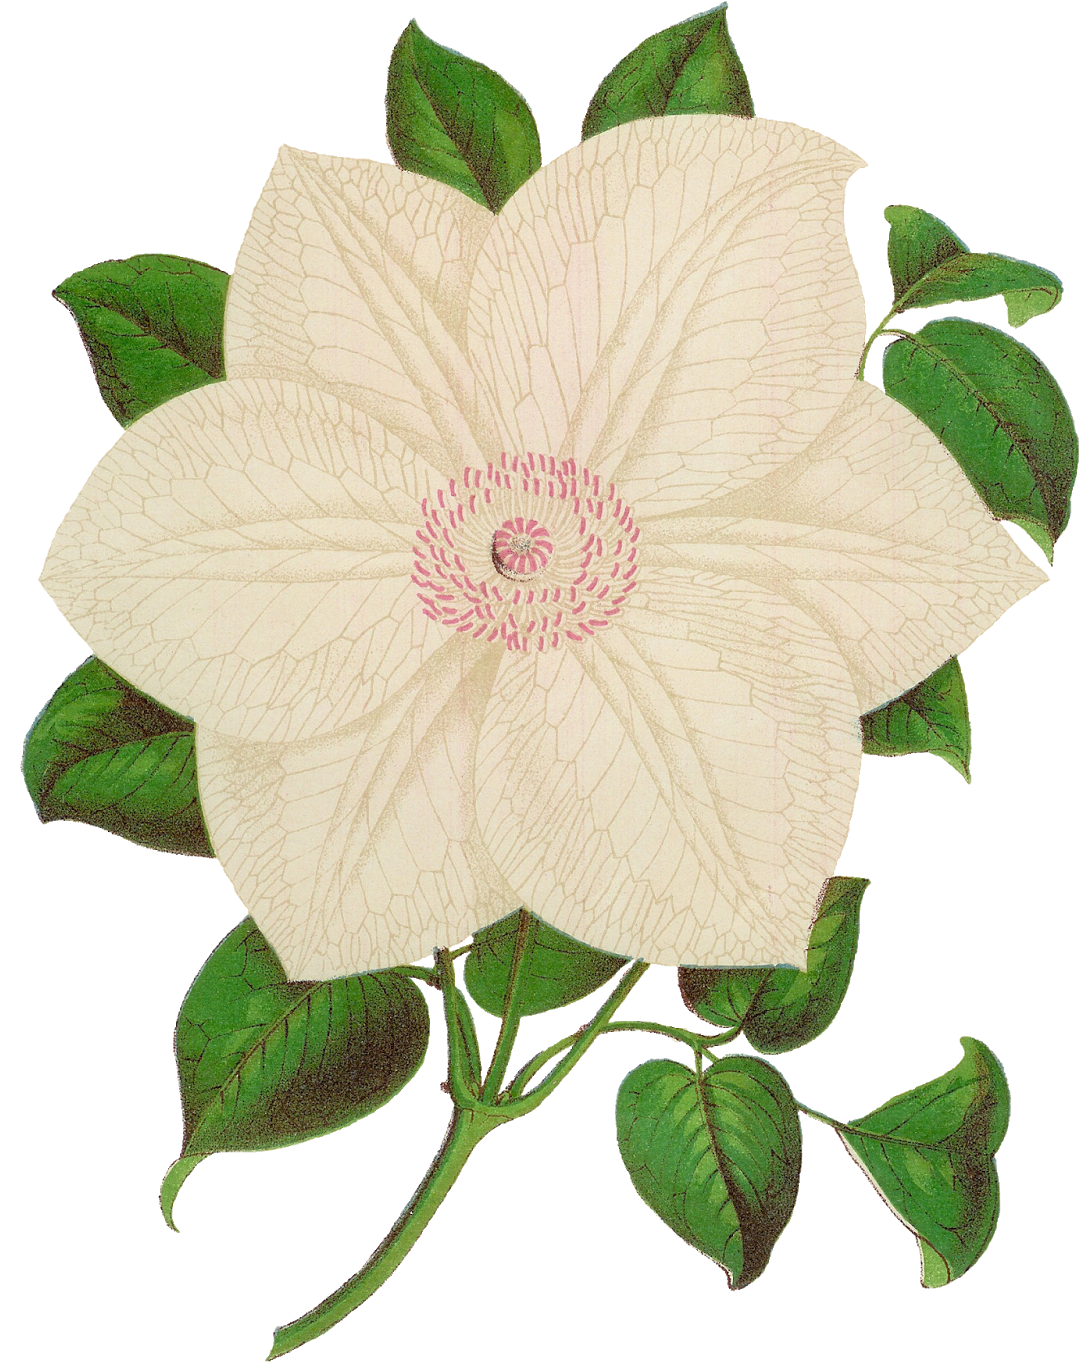 The Second Digital Flower Clip Art Is Of The White - Botanical Illustration (1260x1600)